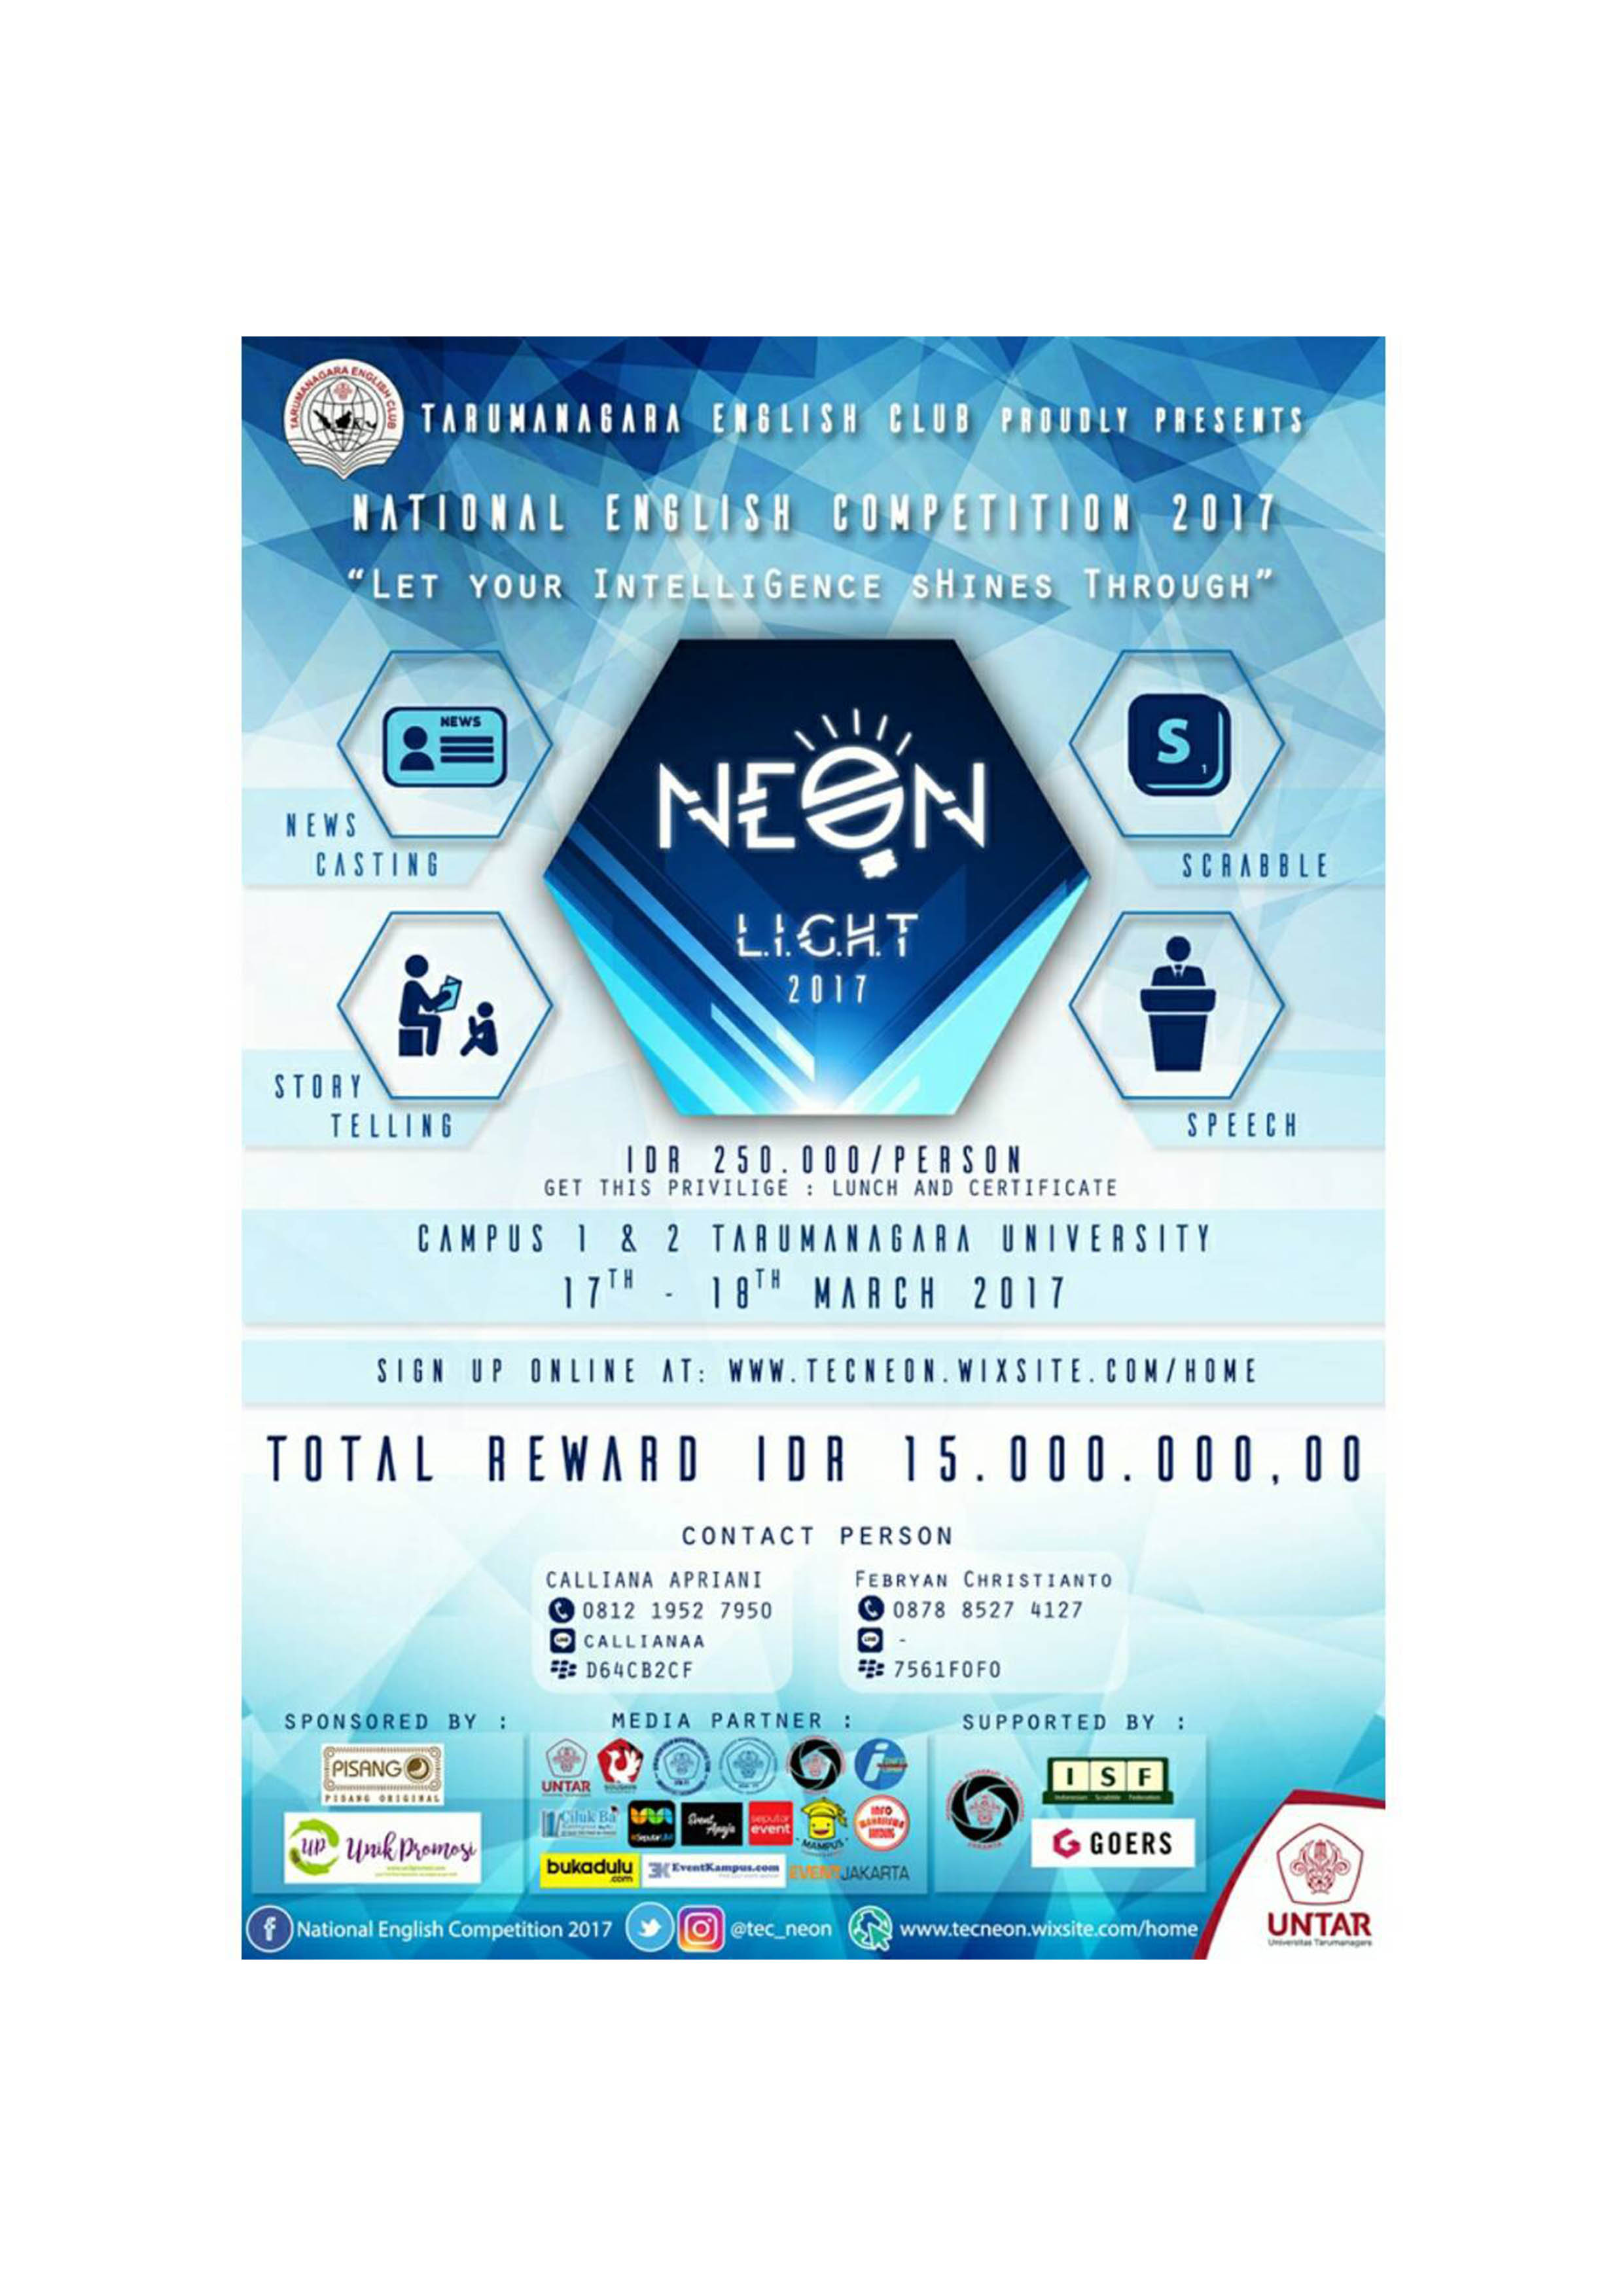 Poster NEON 2017 (National English competitiON 2017)